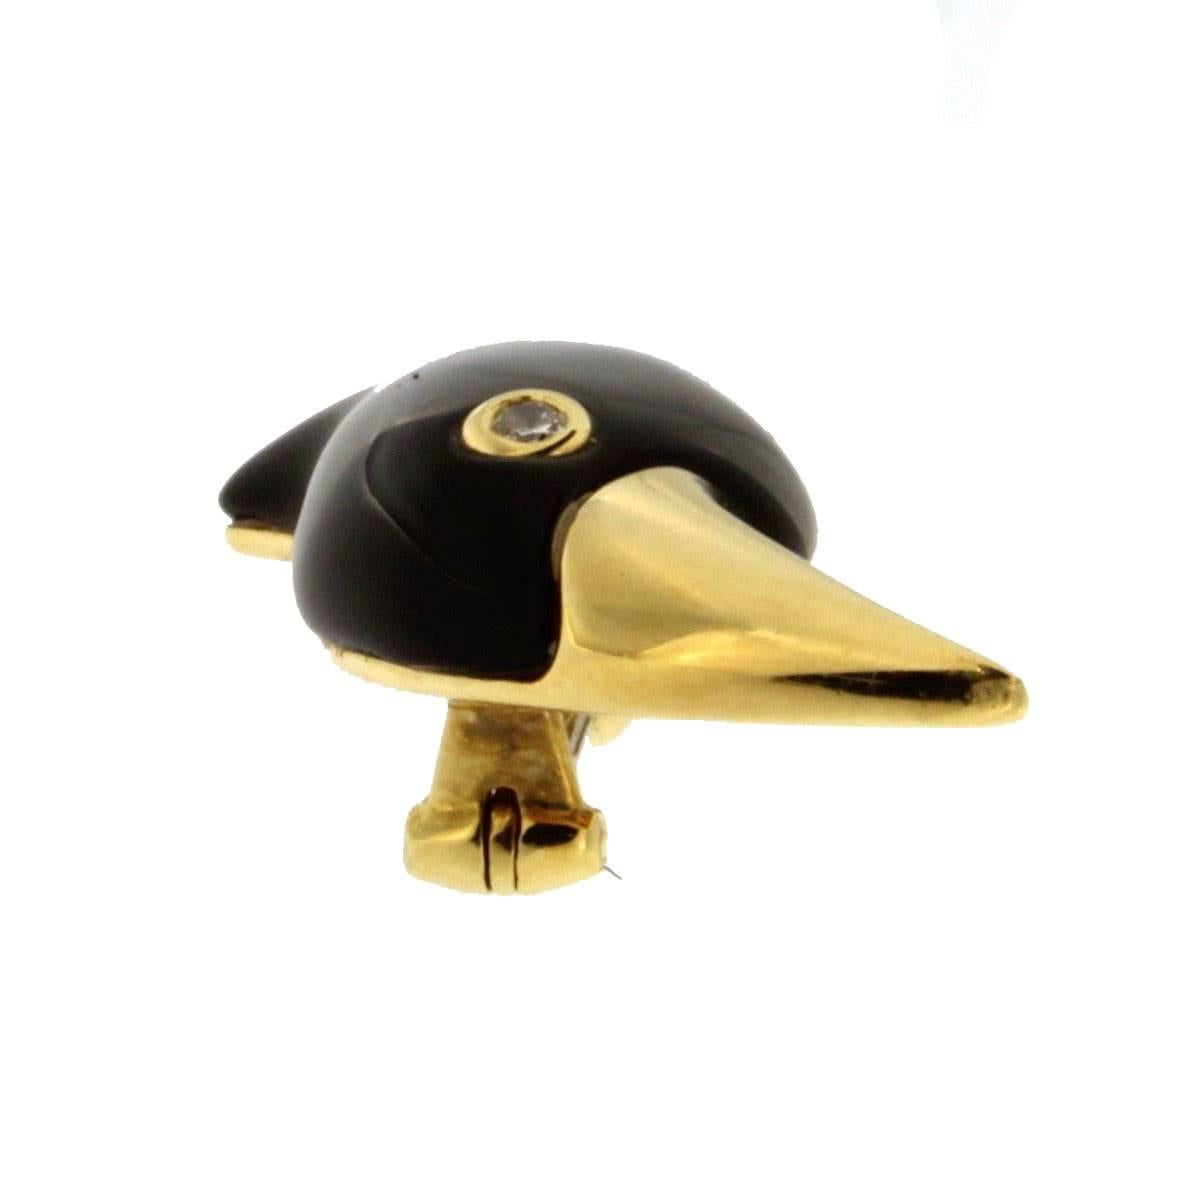 Jona design collection, 18 karat yellow gold toucan shaped brooch, set with a black onyx body and a white diamond eye.    
All Jona jewelry is new and has never been previously owned or worn. Each item will arrive at your door beautifully gift